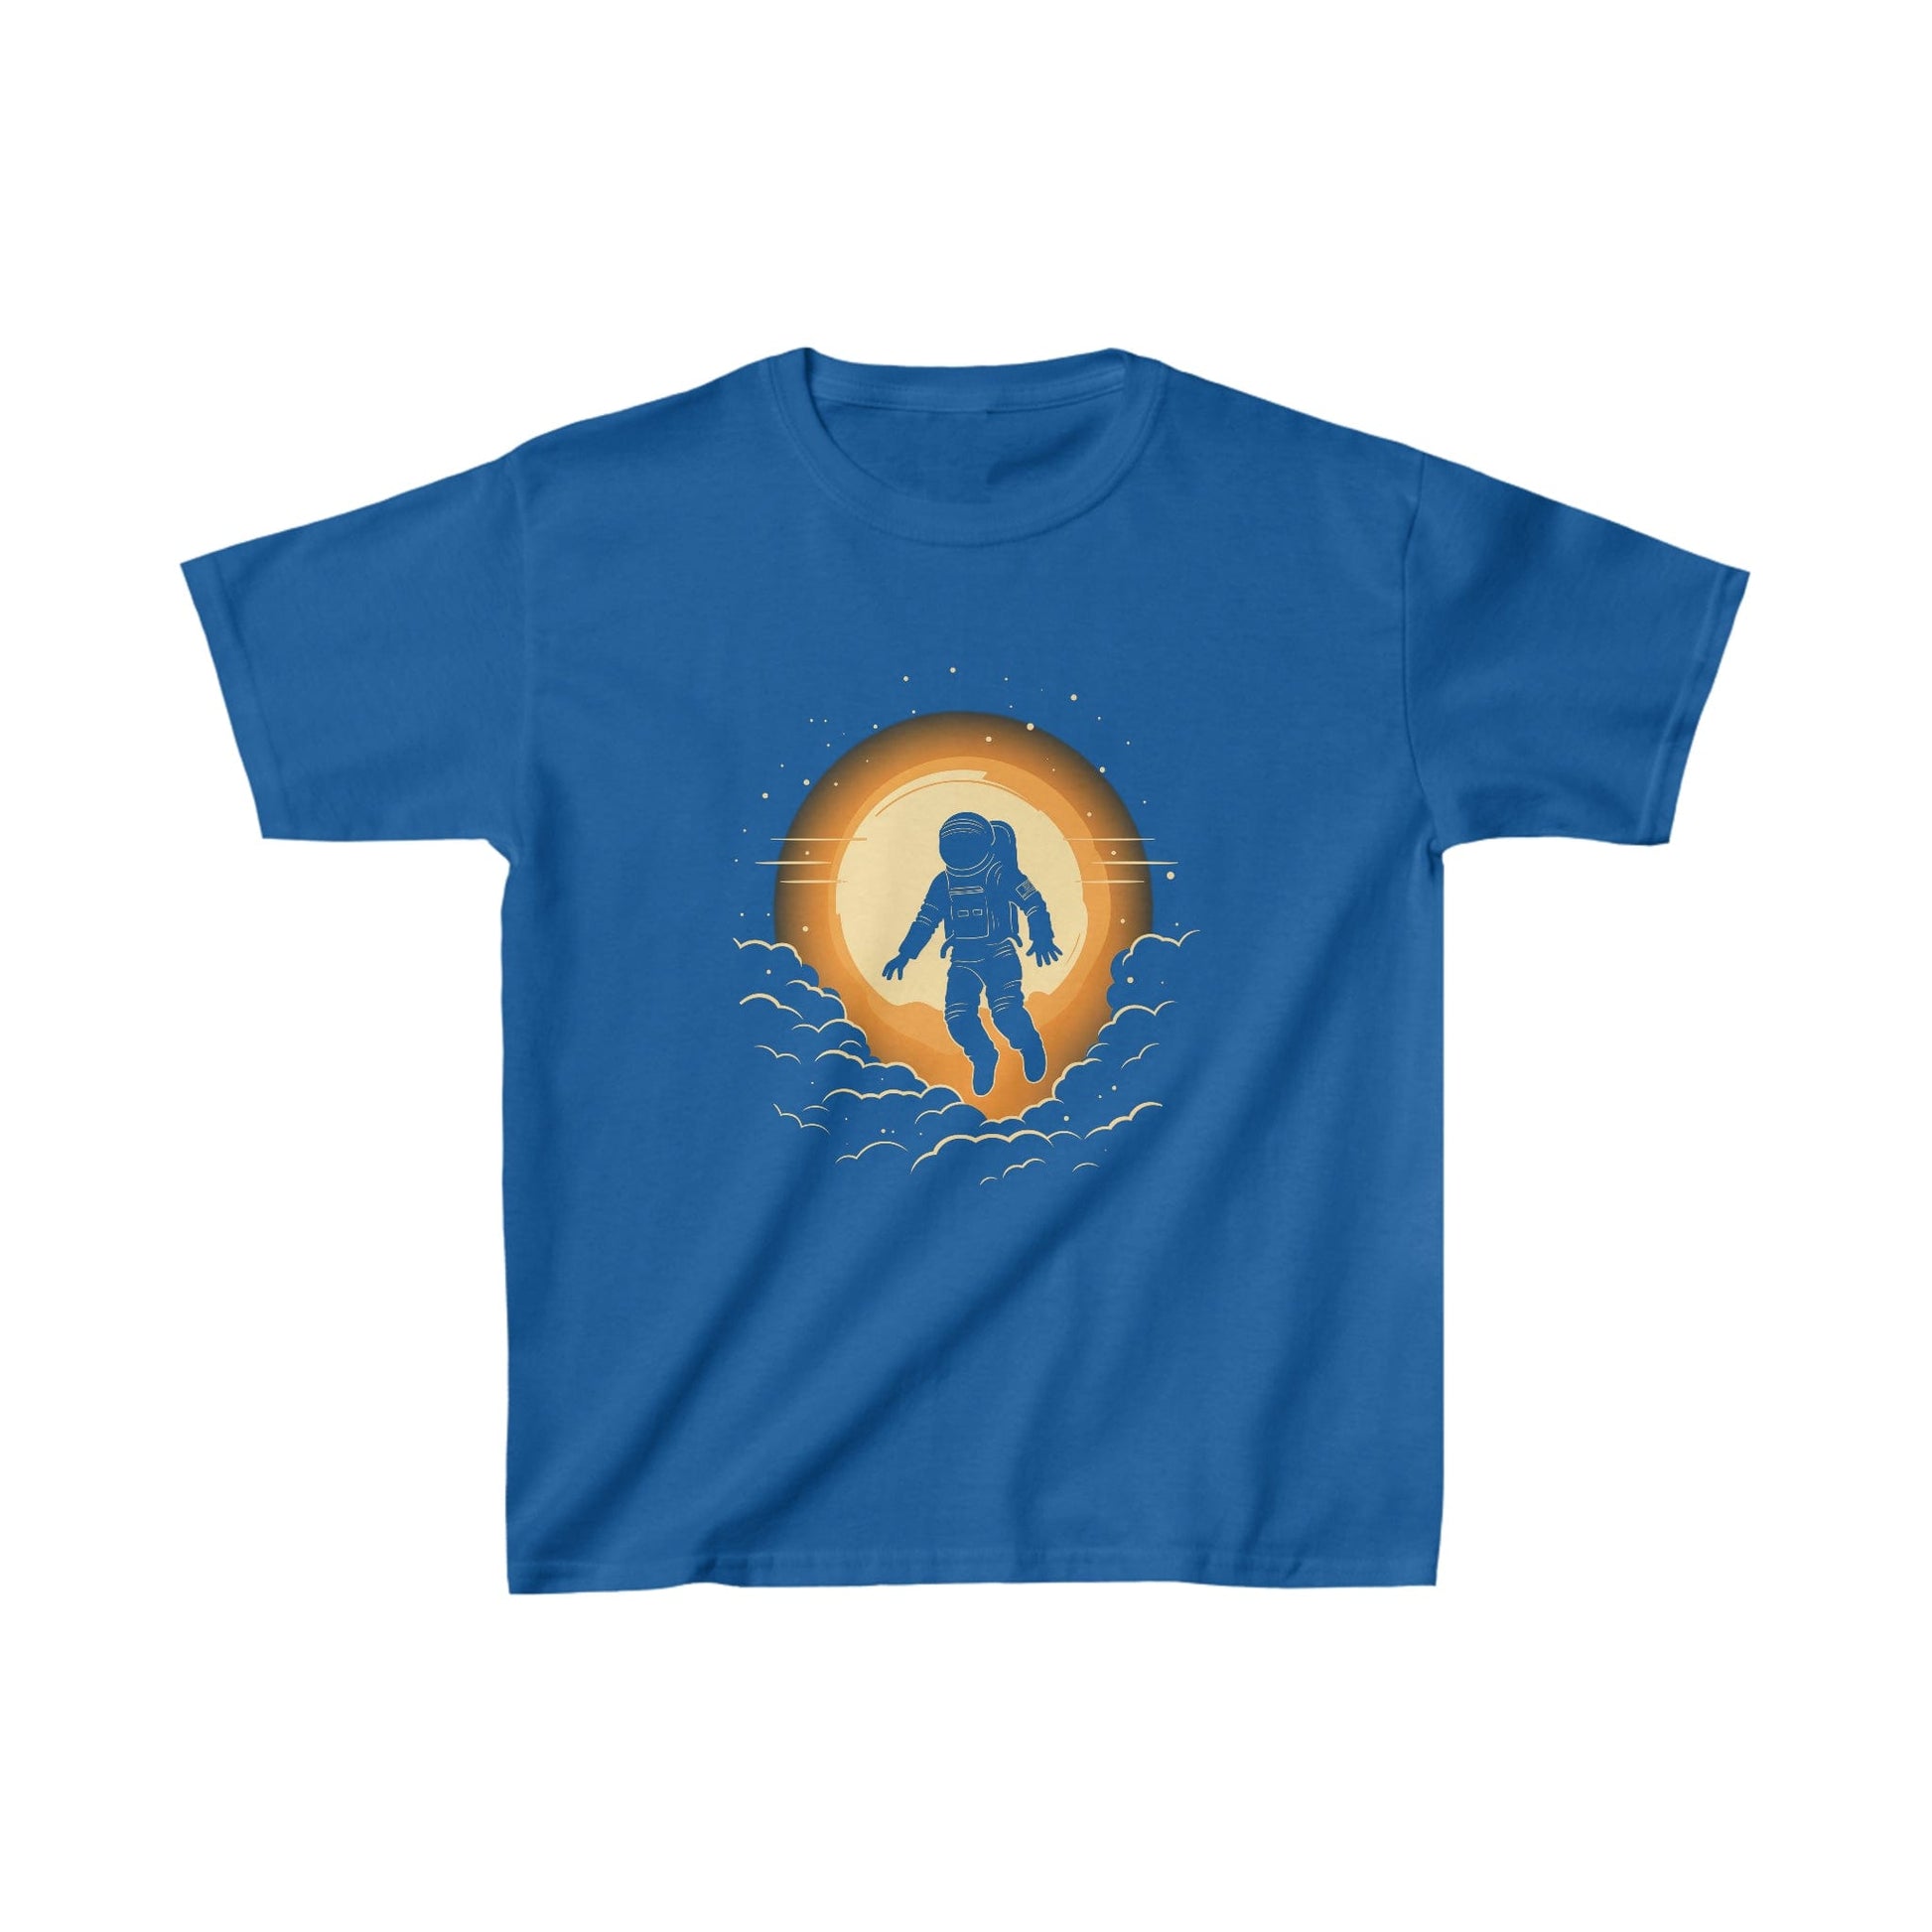 Kids clothes XS / Royal Youth Space Odyssey: Astronaut in Zero Gravity T-Shirt